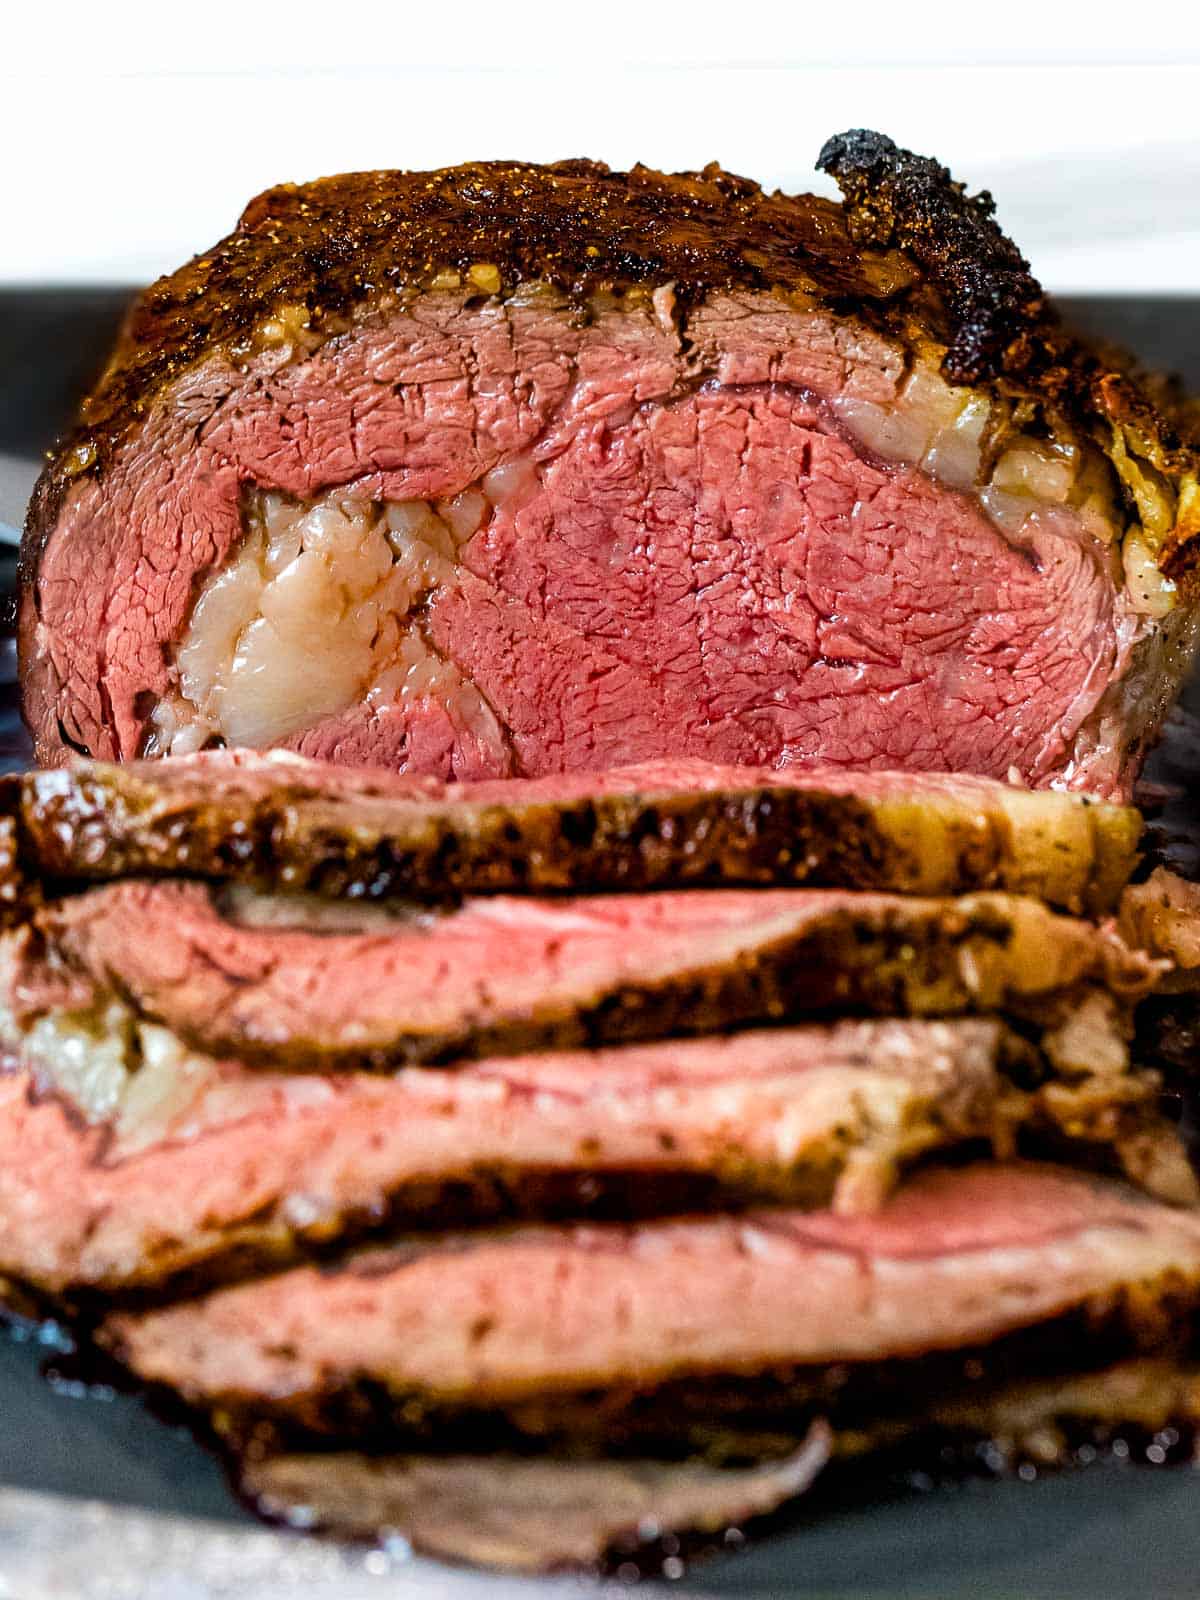 Carnivore recipes, Prime rib roast with brown crust cut into slices on a dark cutting board to reveal medium rare doneness.